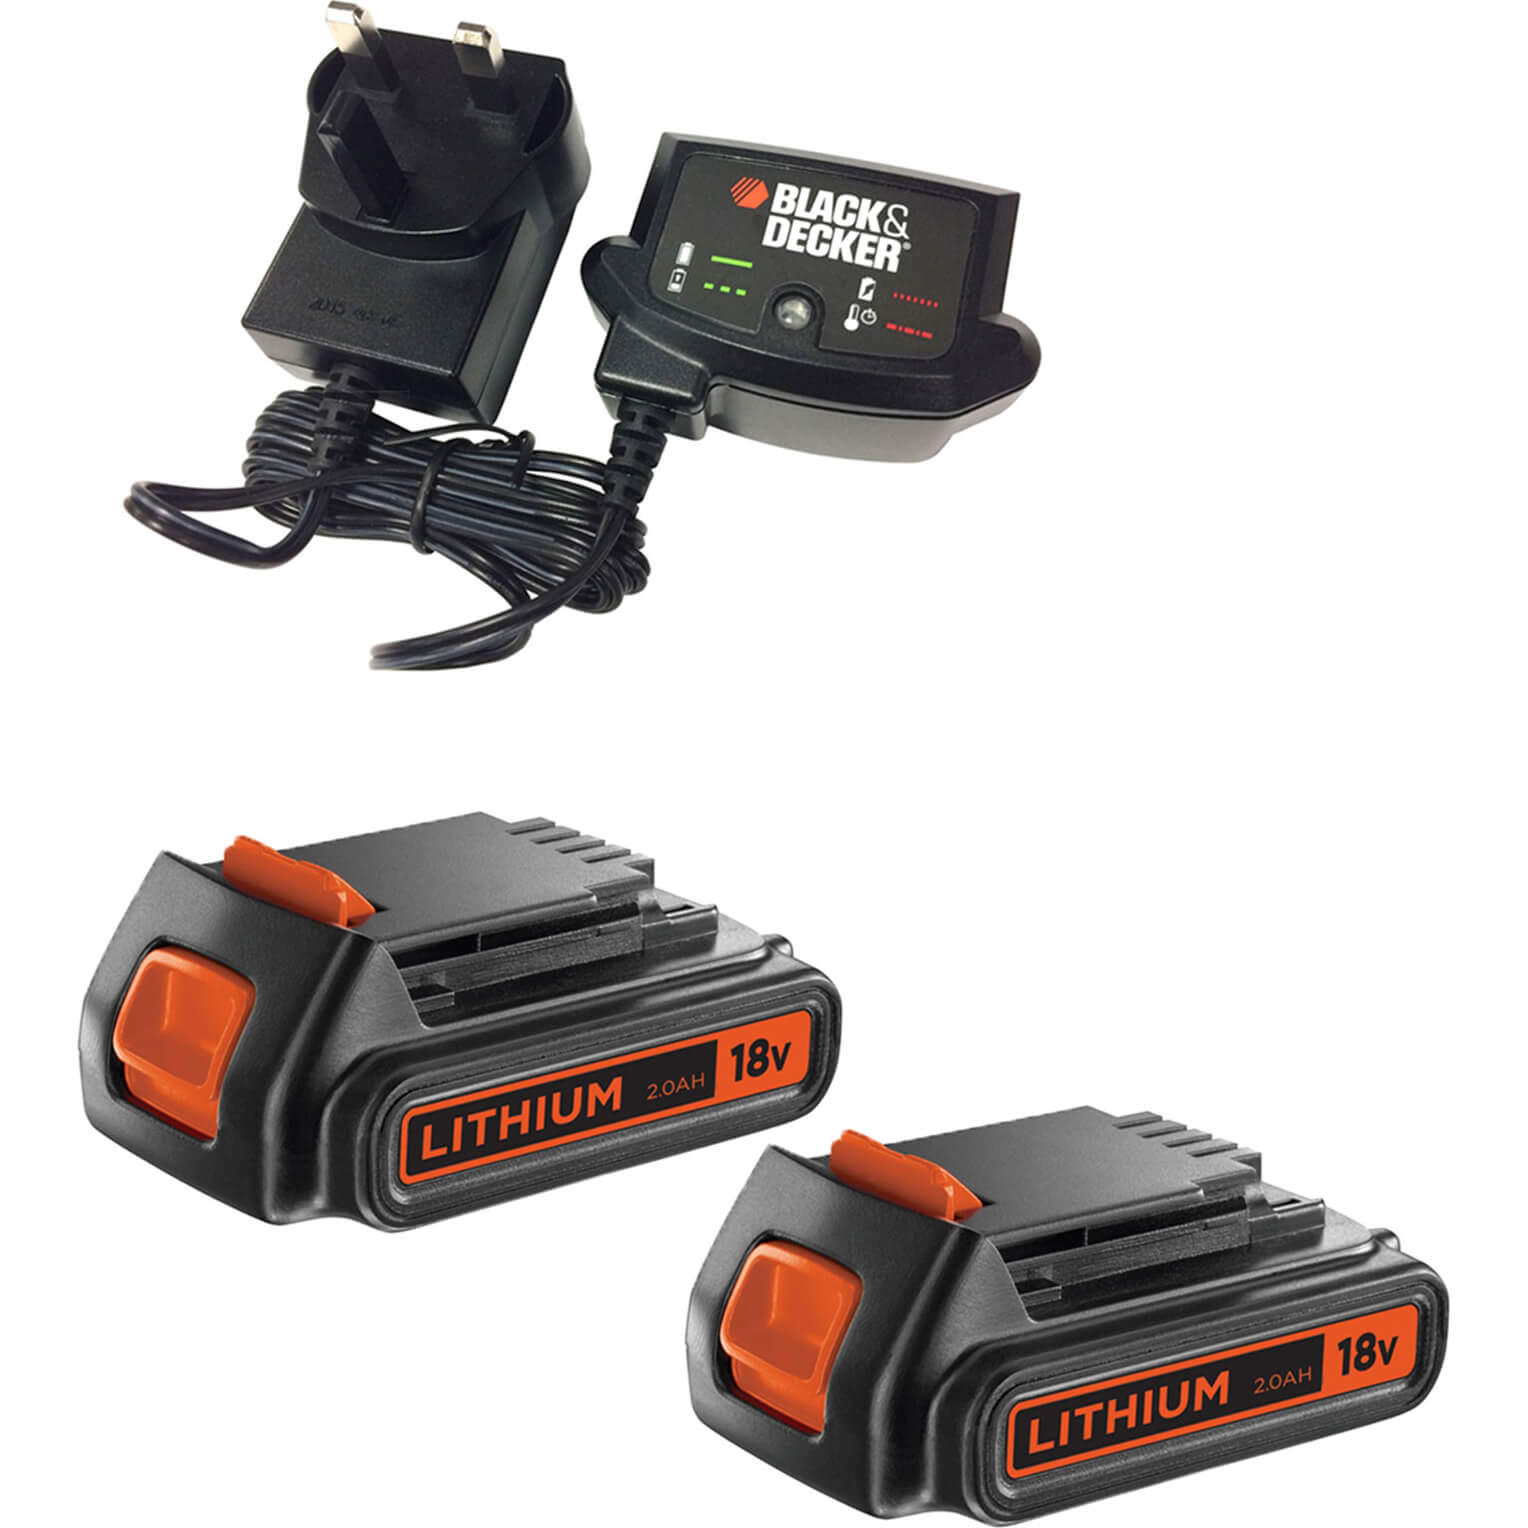 Image of Black and Decker Genuine 18v Twin Li-ion Battery and Charger Pack 2ah